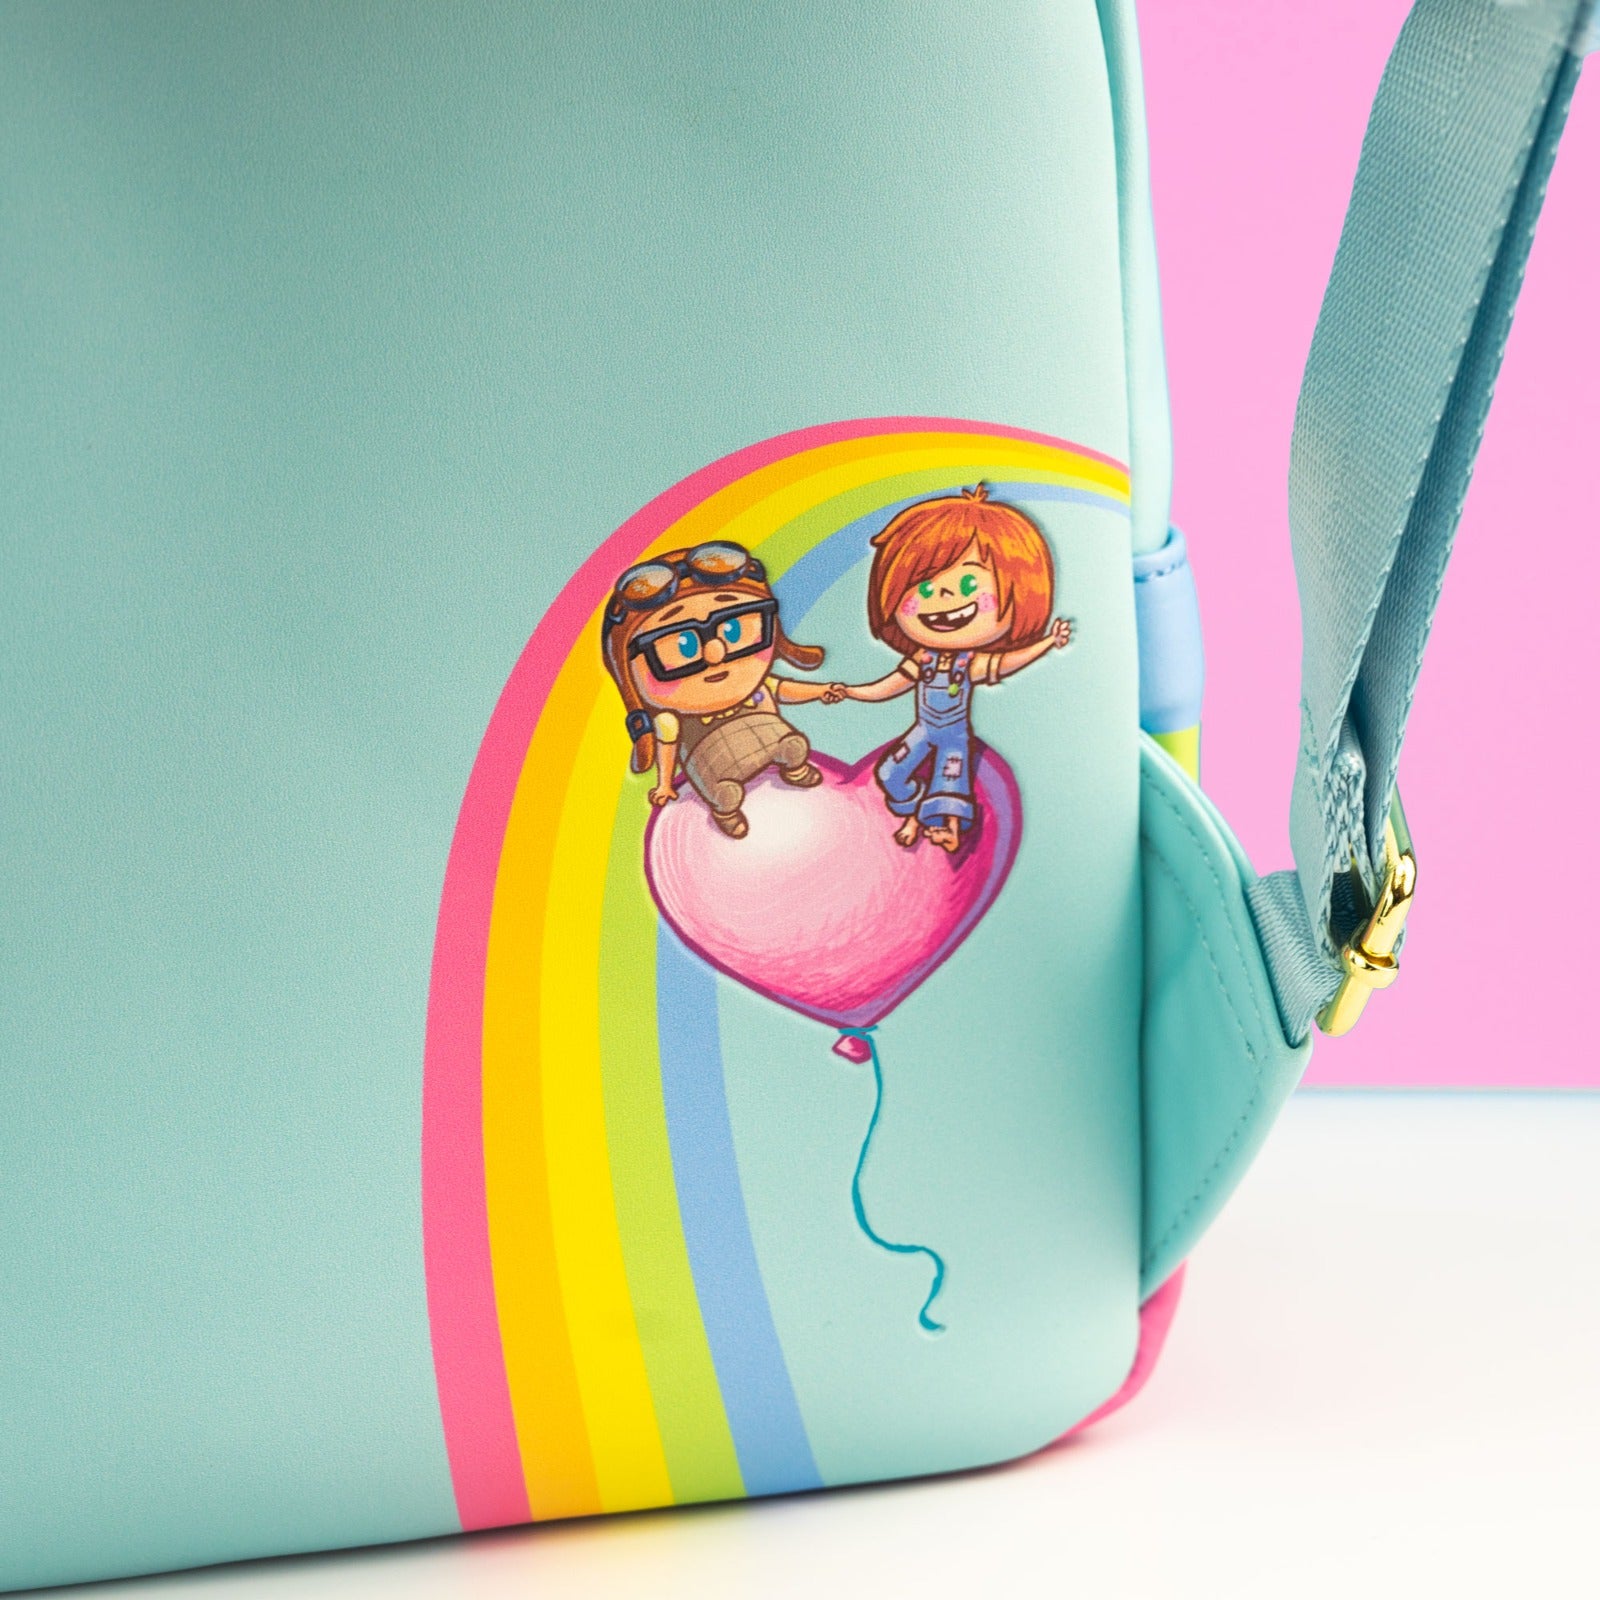 Loungefly x Disney Pixar Up Carl and Ellie Love Heart Balloons Mini Backpack